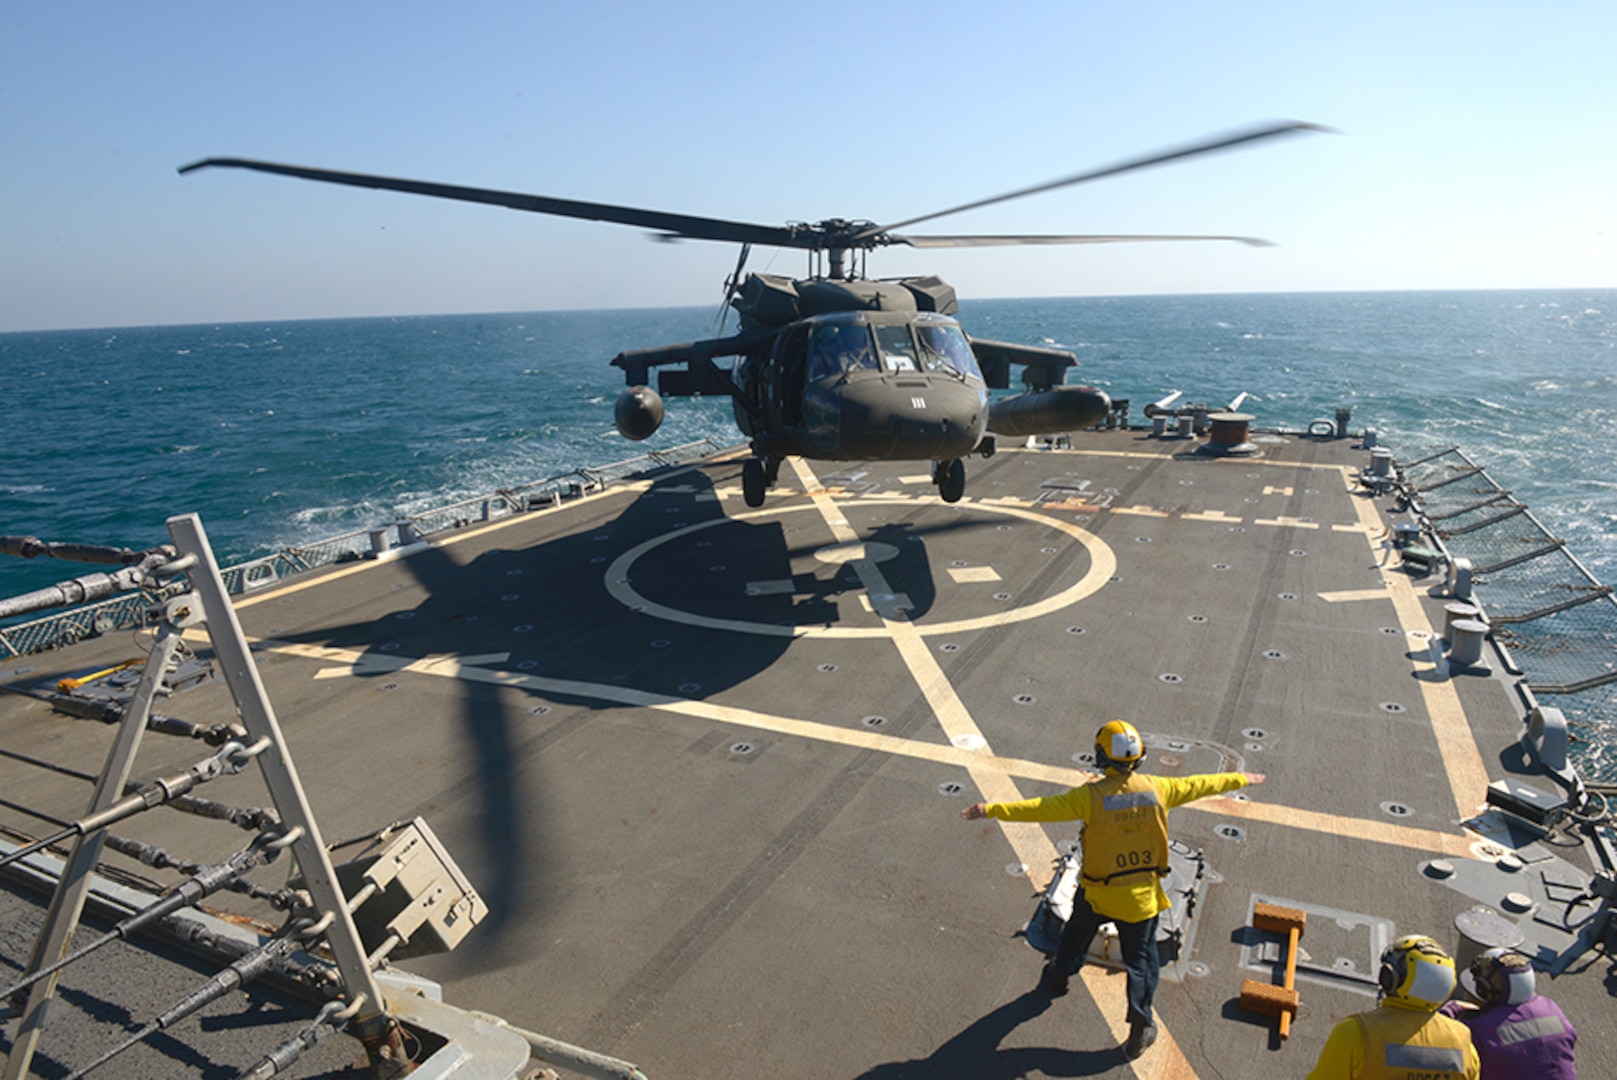 Aviators with the Minnesota, Texas and Utah National Guards, led by the Kansas National Guard’s 1st Battalion, 108th Aviation Regiment, practice landing and taking off during deck landing qualification training aboard the Arleigh Burke-class guided-missile destroyer USS Mitscher (DDG 57) in the Arabian Gulf on Feb. 4, 2019.